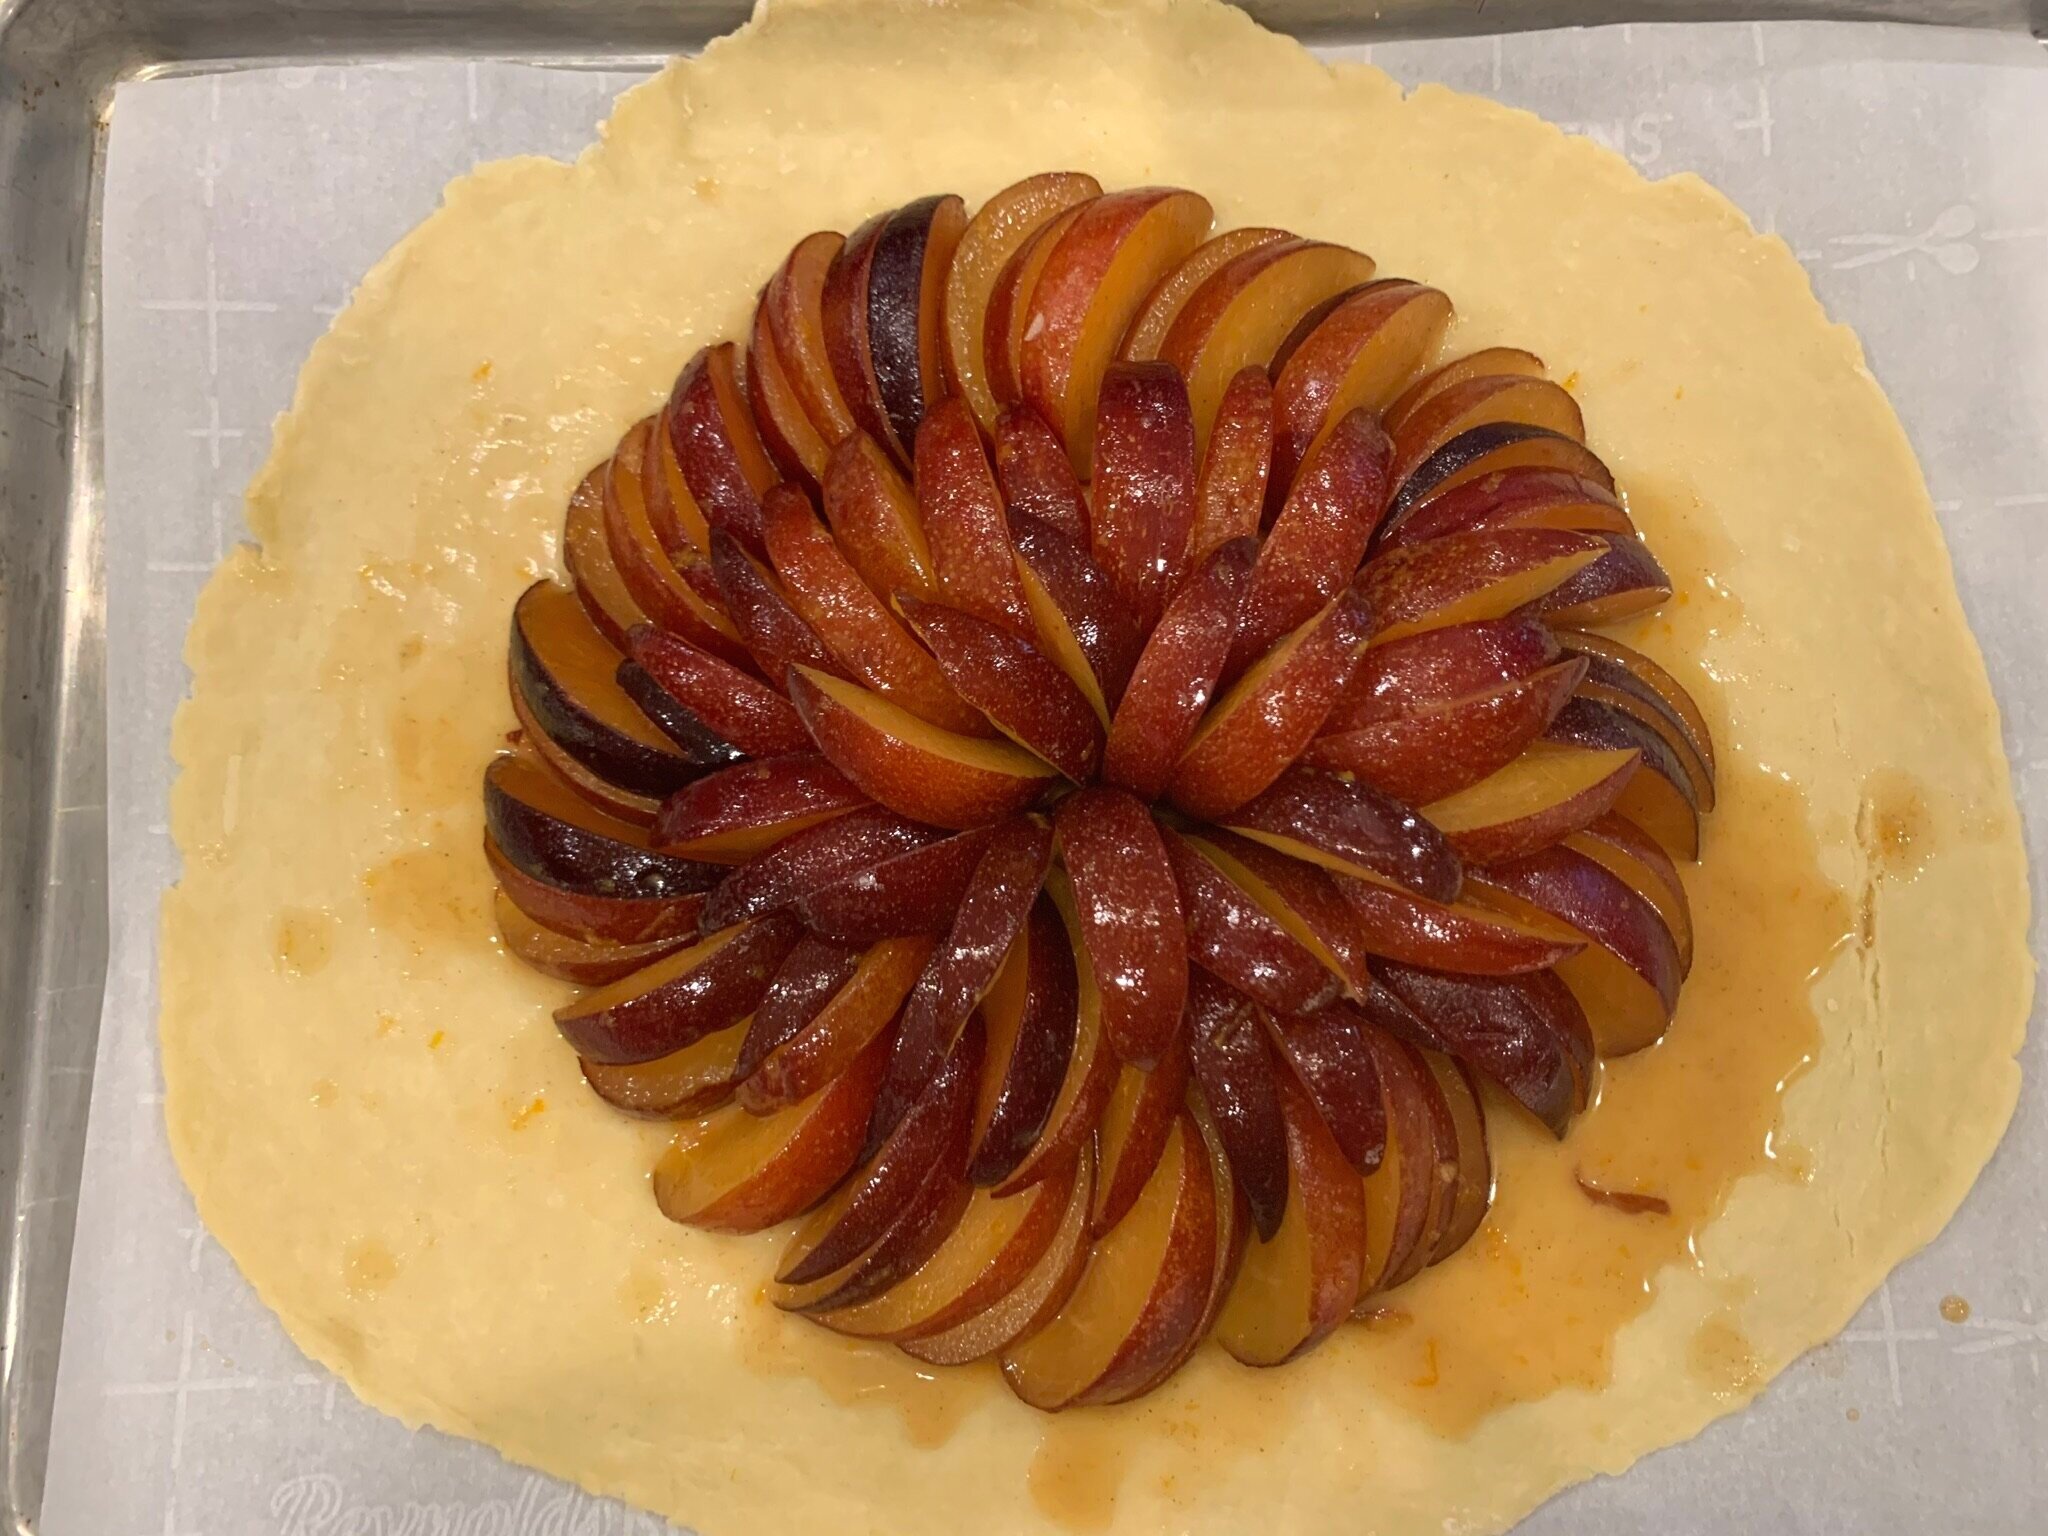 1c) Neatly overlap middle circle of plums.